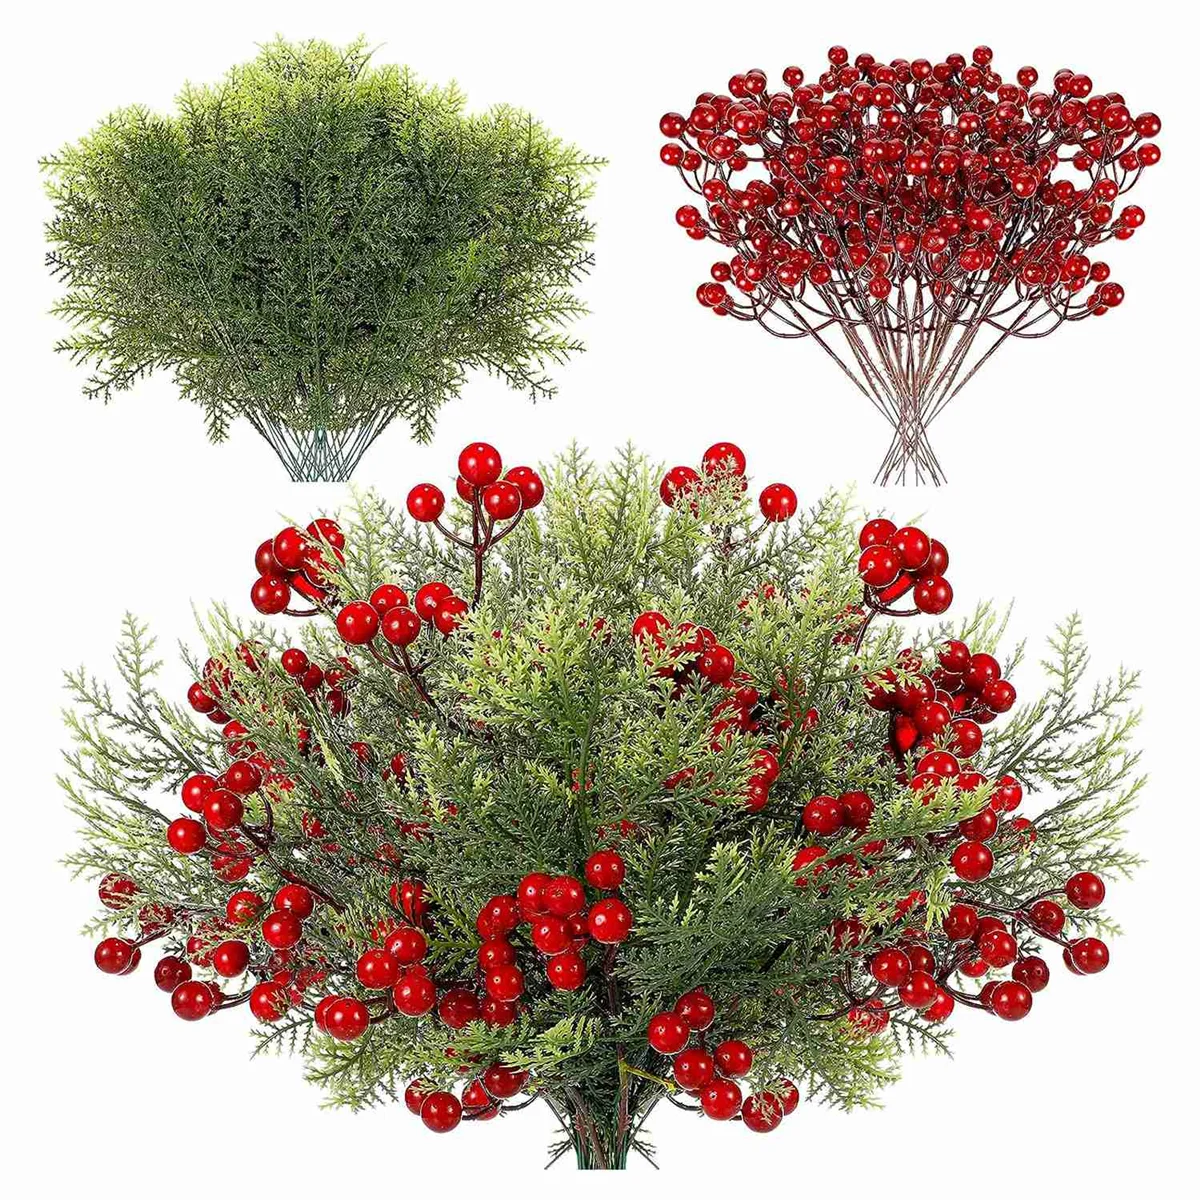 

48 Pcs Christmas Artificial Faux Cedar Branches, Artificial Sprigs Faux Pine Leaves, Greenery Pine Stems Picks for Xmas